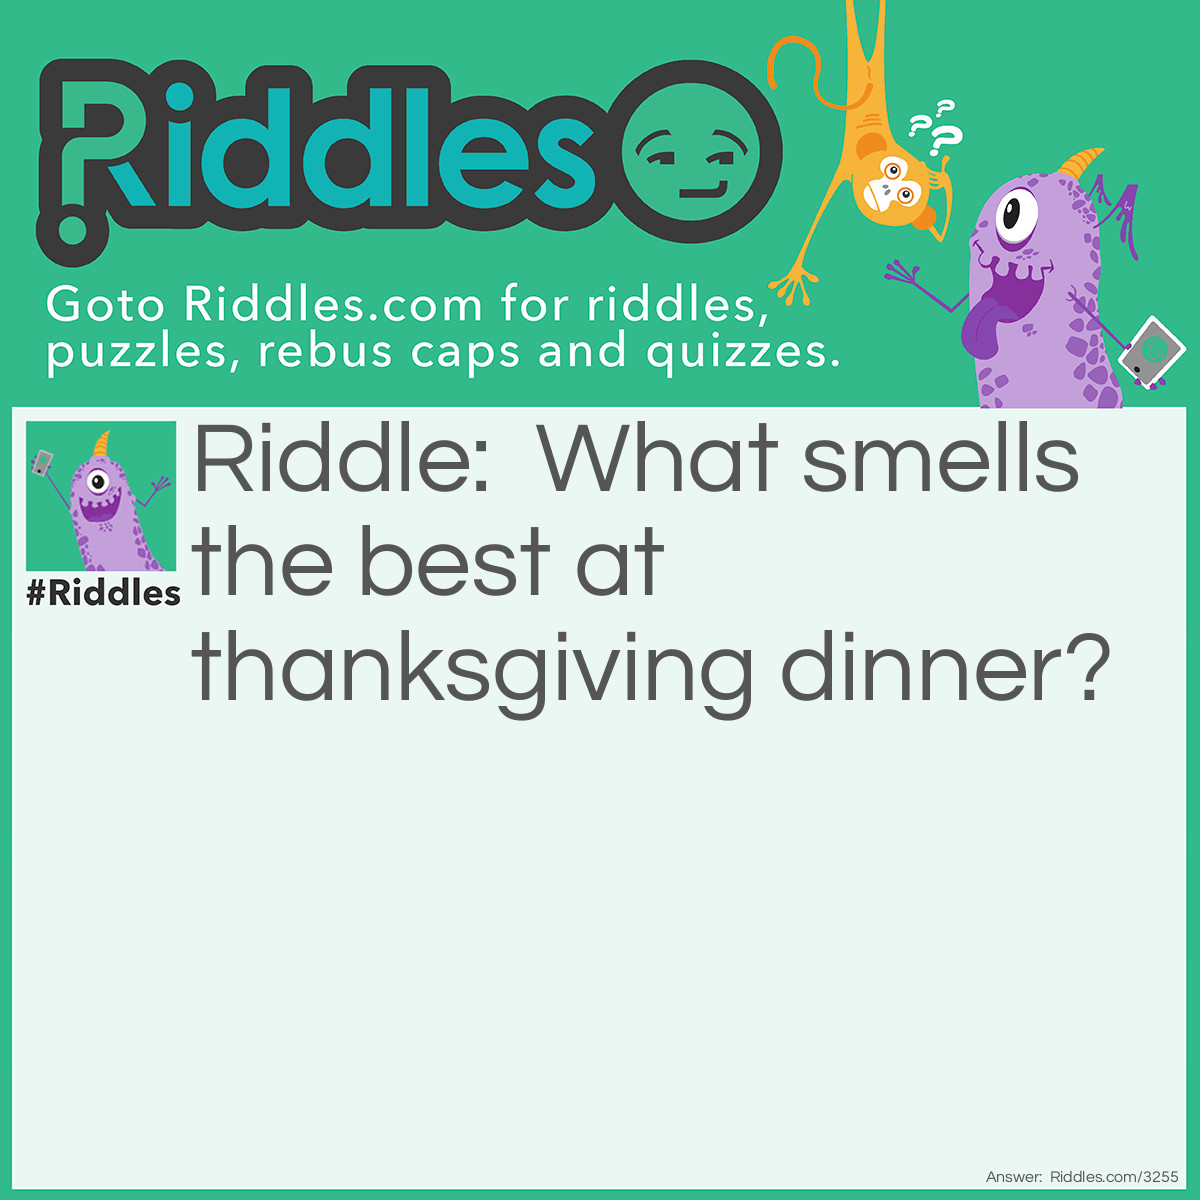 Riddle: What smells the best at <a href="/quiz/thanksgiving-riddles">Thanksgiving dinner</a>? Answer: Your nose.